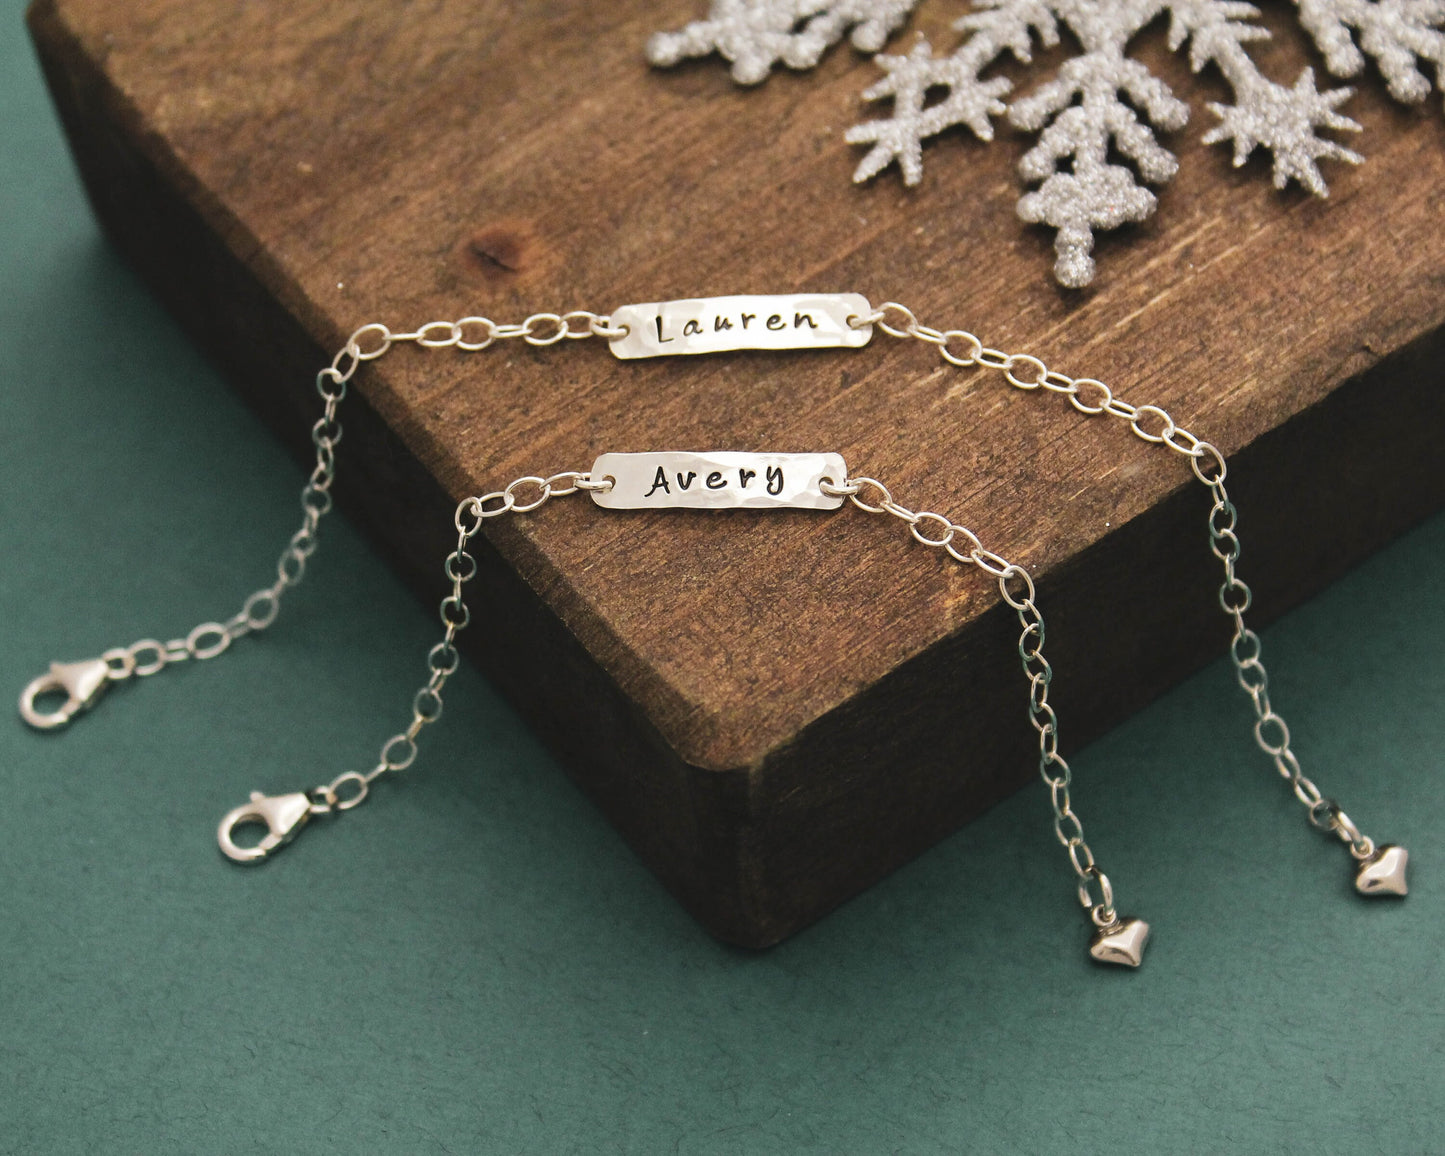 Mother Daughter Bracelet Set Personalized Hand Stamped Names Sterling Silver Jewelry, Mother's Day Gift, Mom + Daughter Gift Set